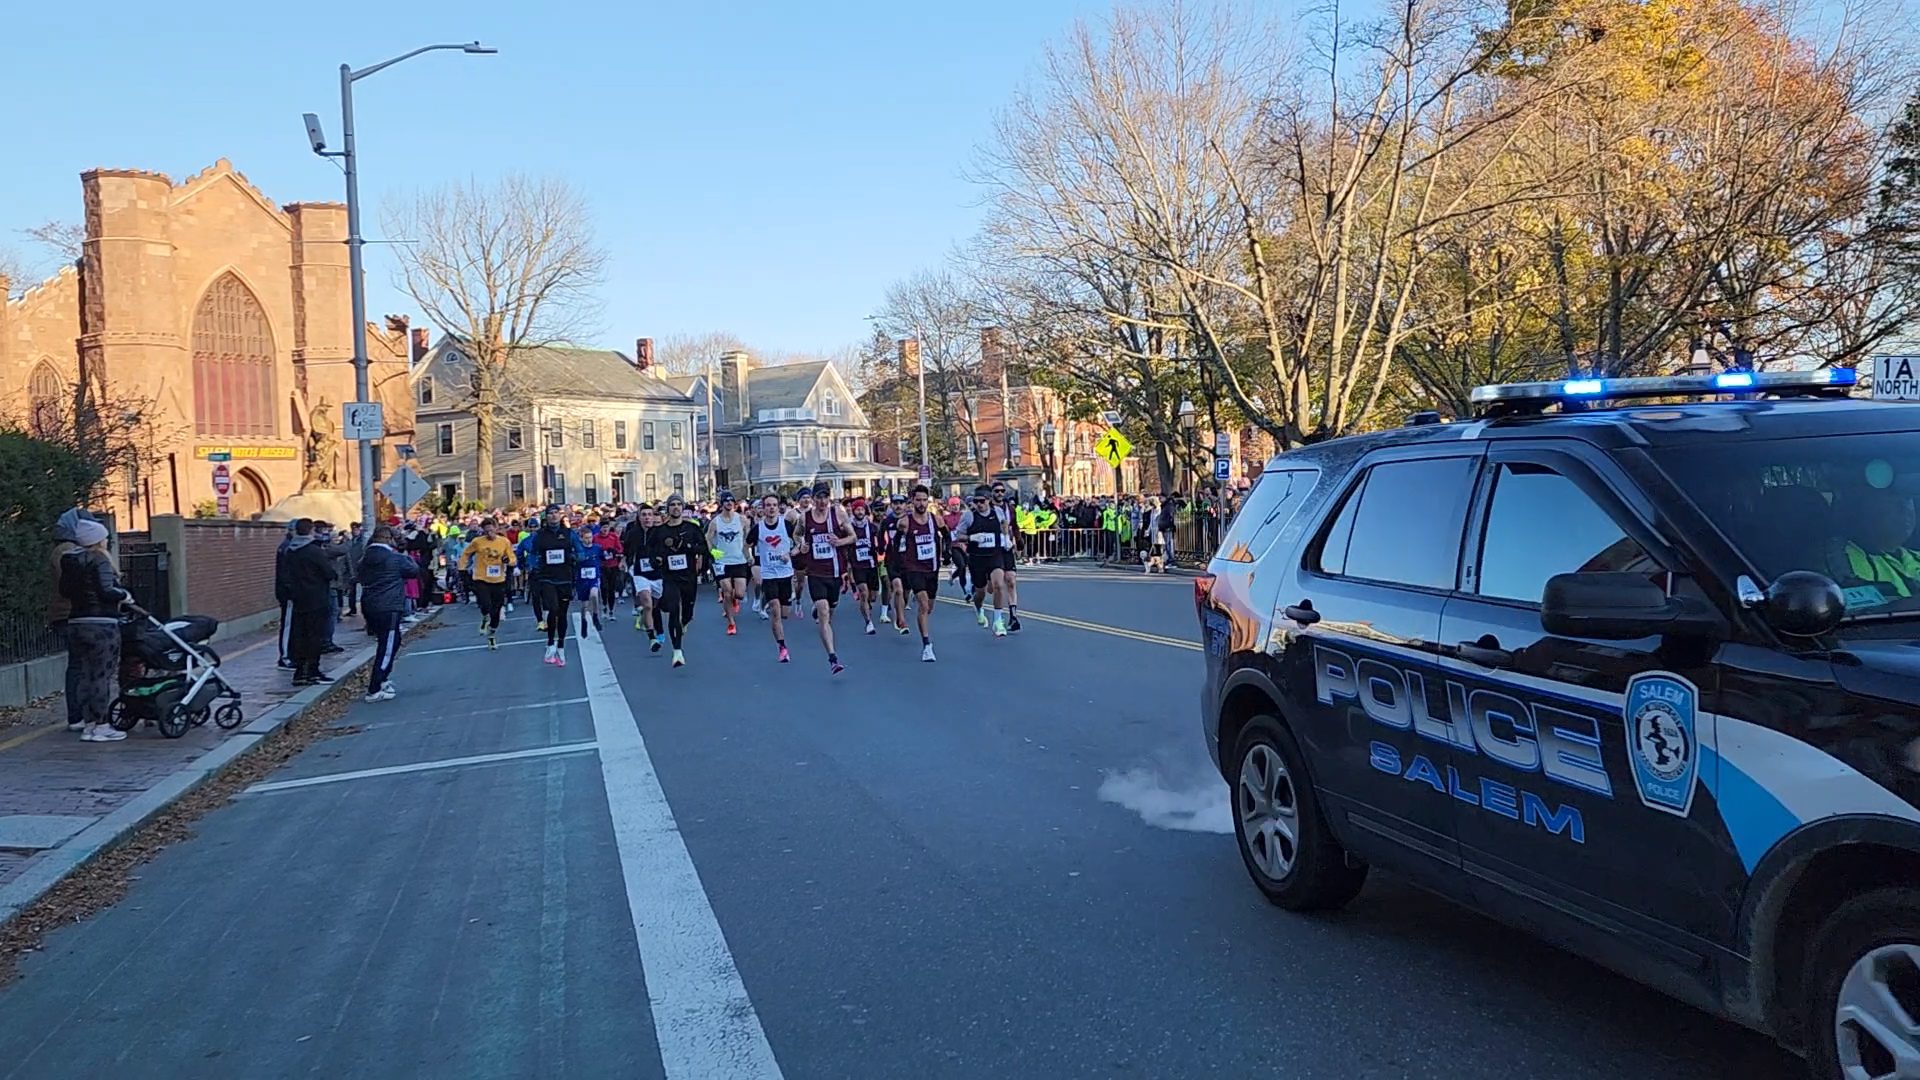 A group of runners are running down the street in front of a police car.